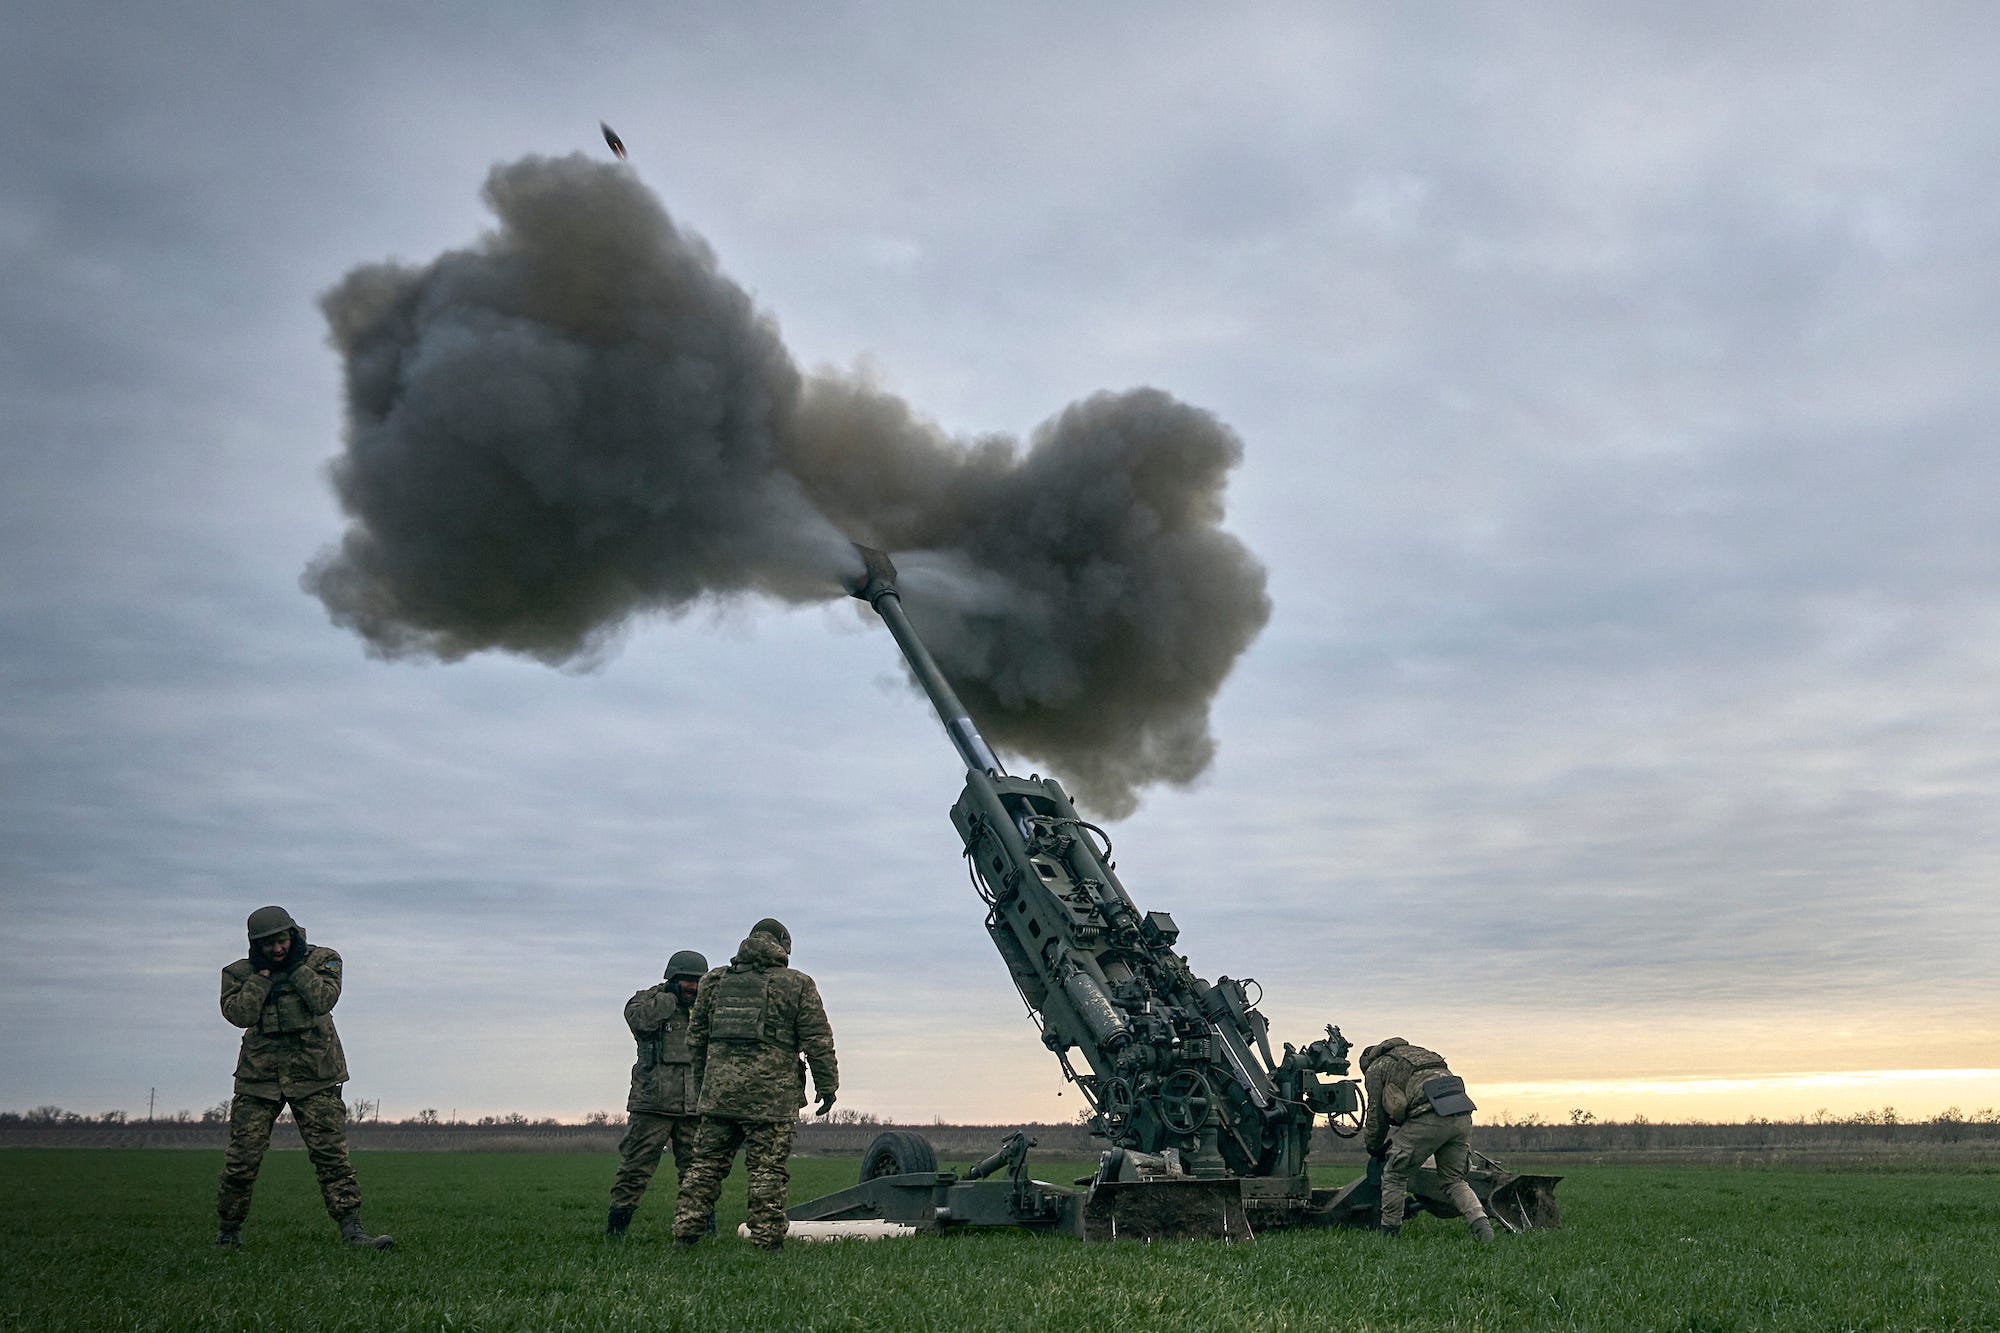 microsoft, us army general says the 'future is not bright' for towed artillery, like the m777s america gave ukraine to fight the russians